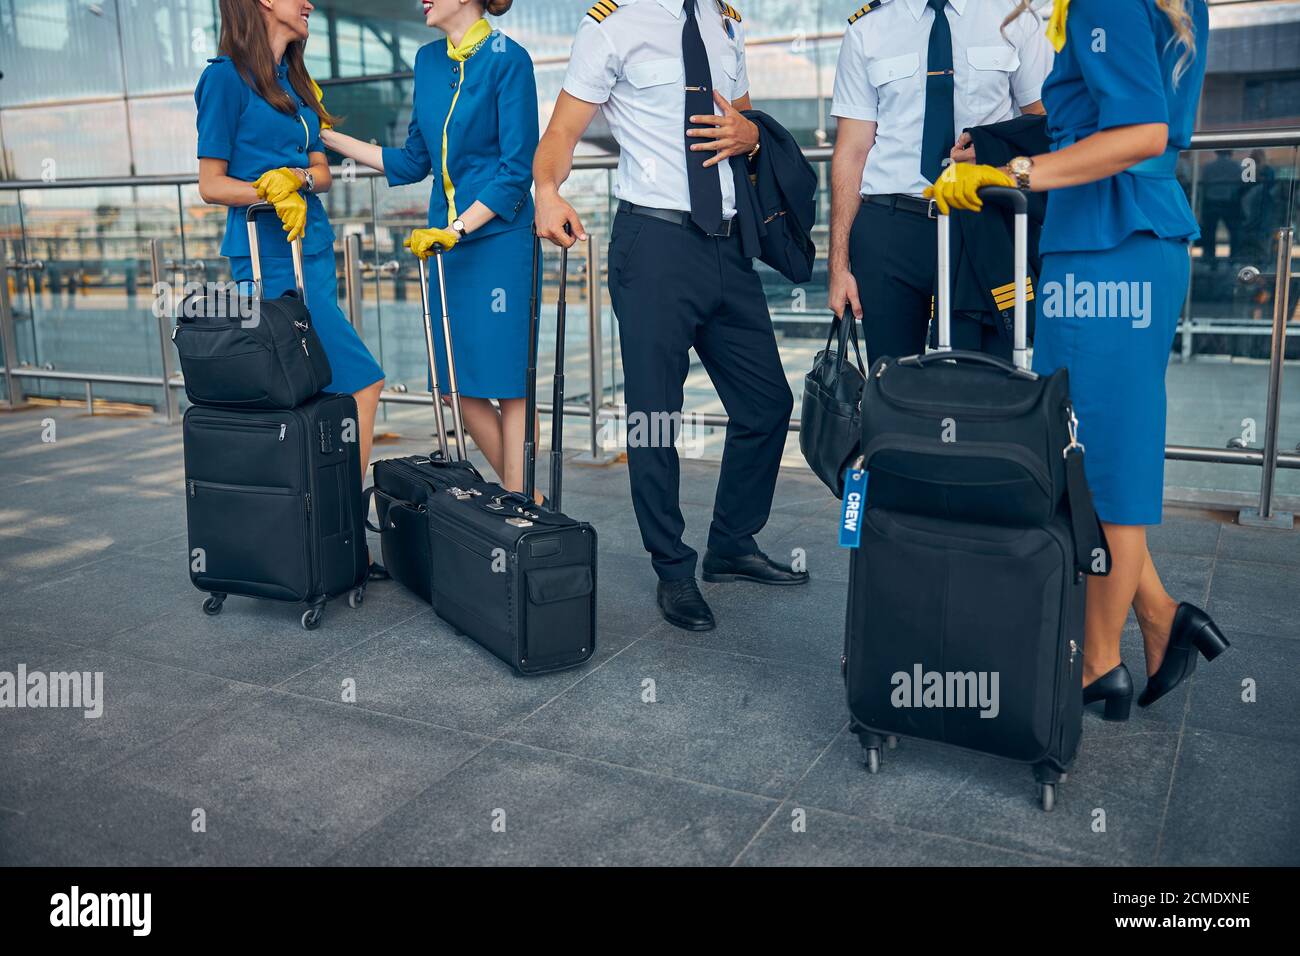 Airline workers with travel bags standing on the street Stock Photo